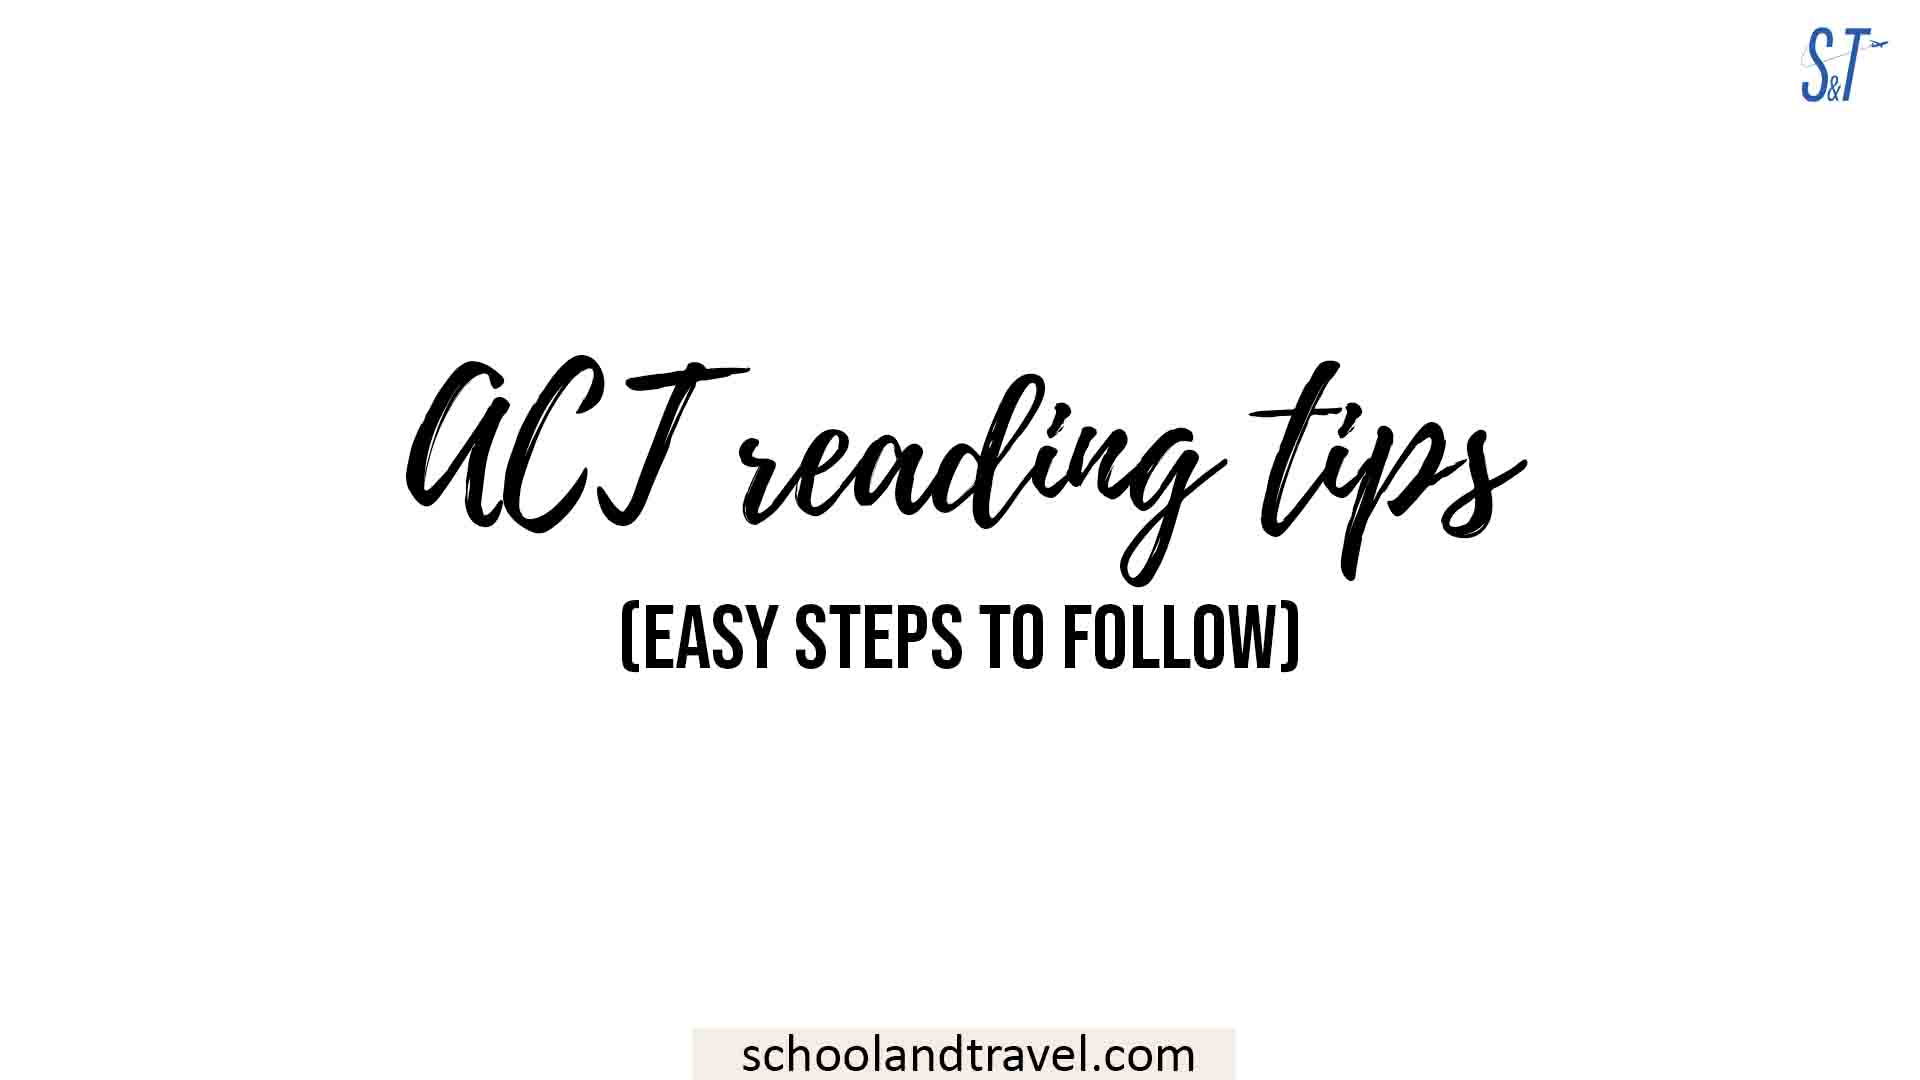 ACT reading tips